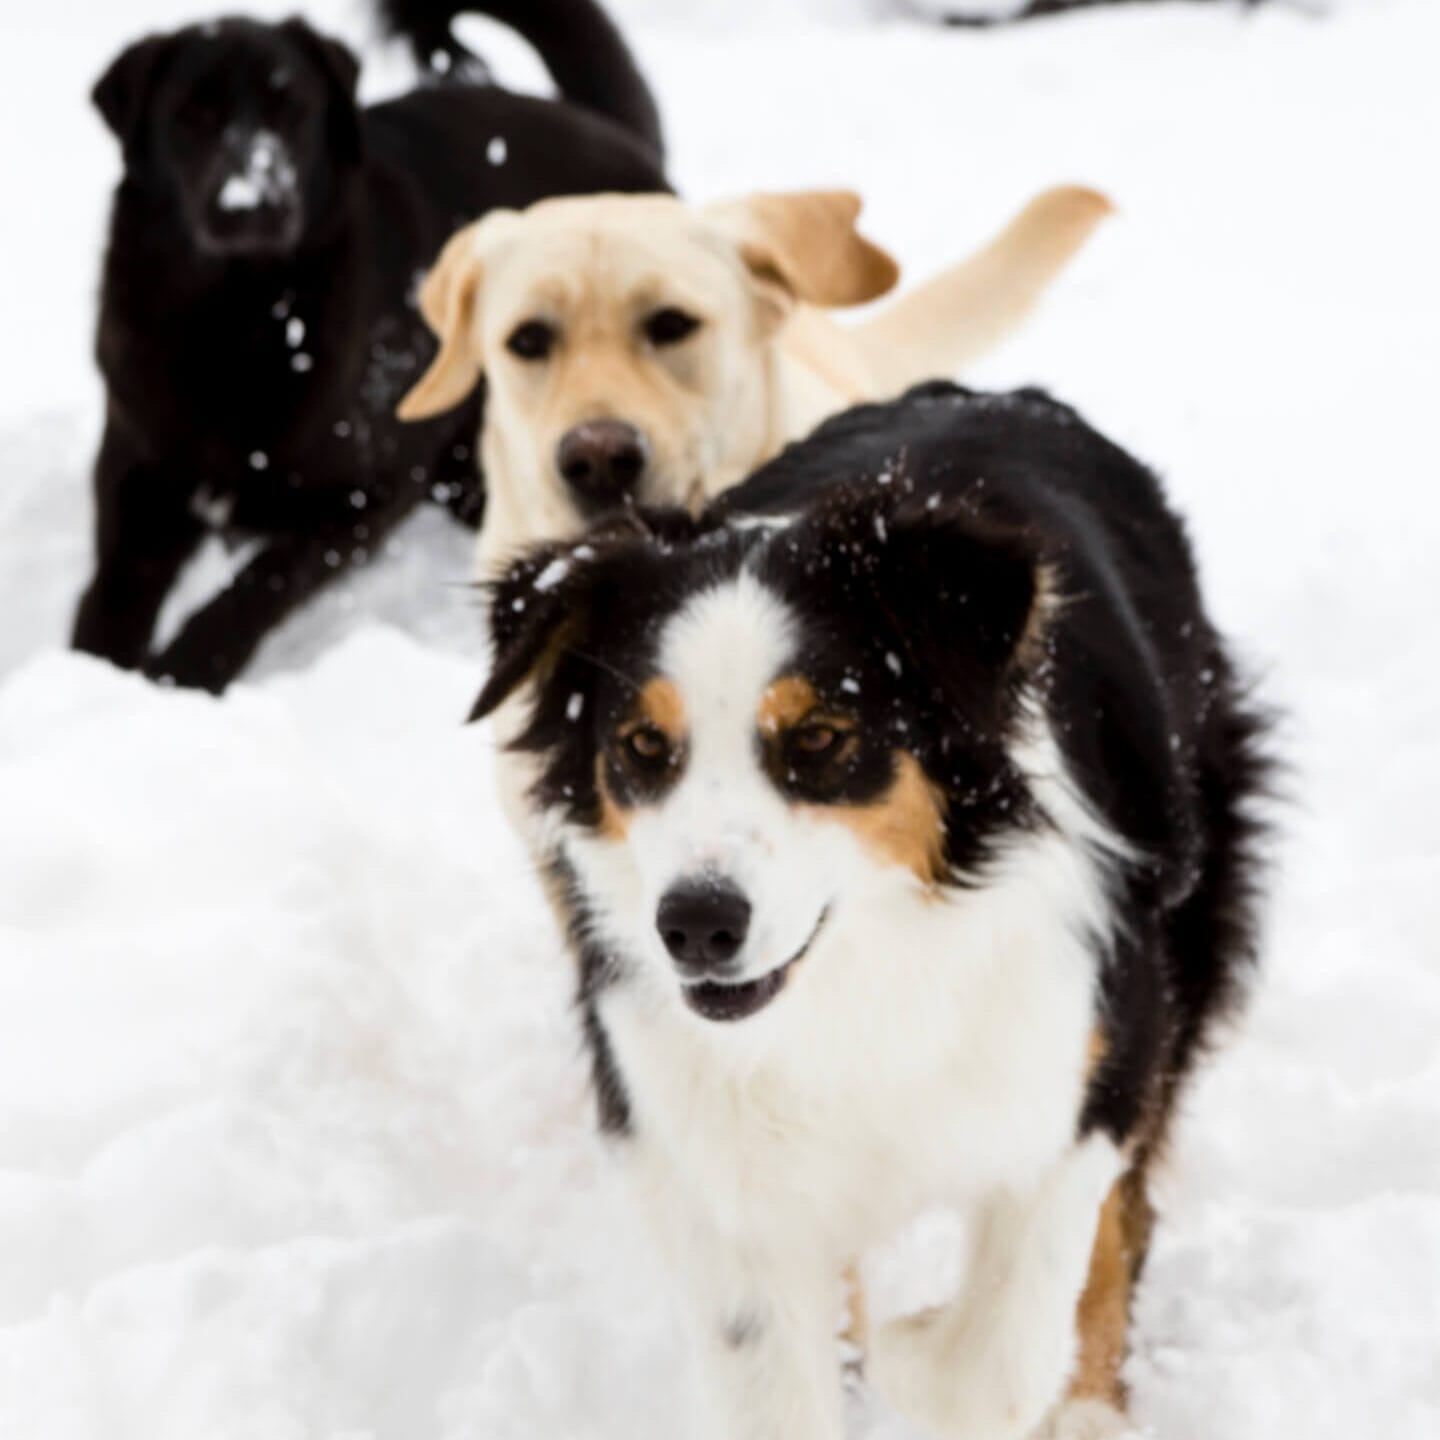 Border Collie, Yellow Labrador, and Black Labrador Retriever playing in the snow. Large breed dogs require high quality protein to maintain lean muscle mass.